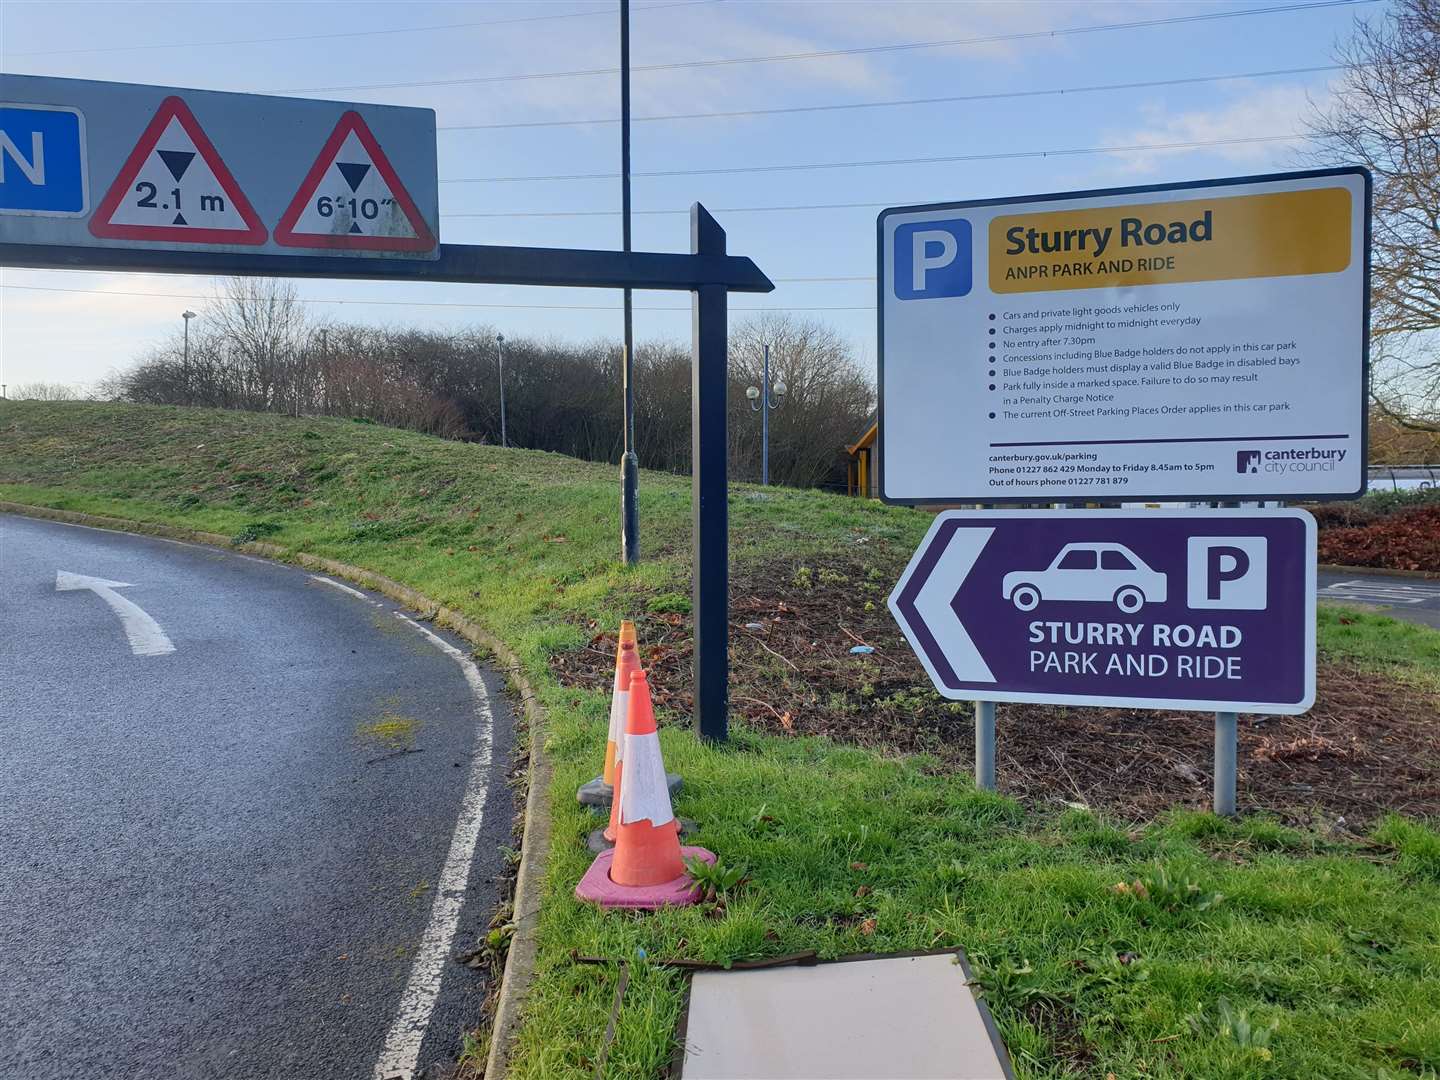 Canterbury City Council chiefs say they will save thousands of pound through mothballing Sturry Road's underused Park and Ride